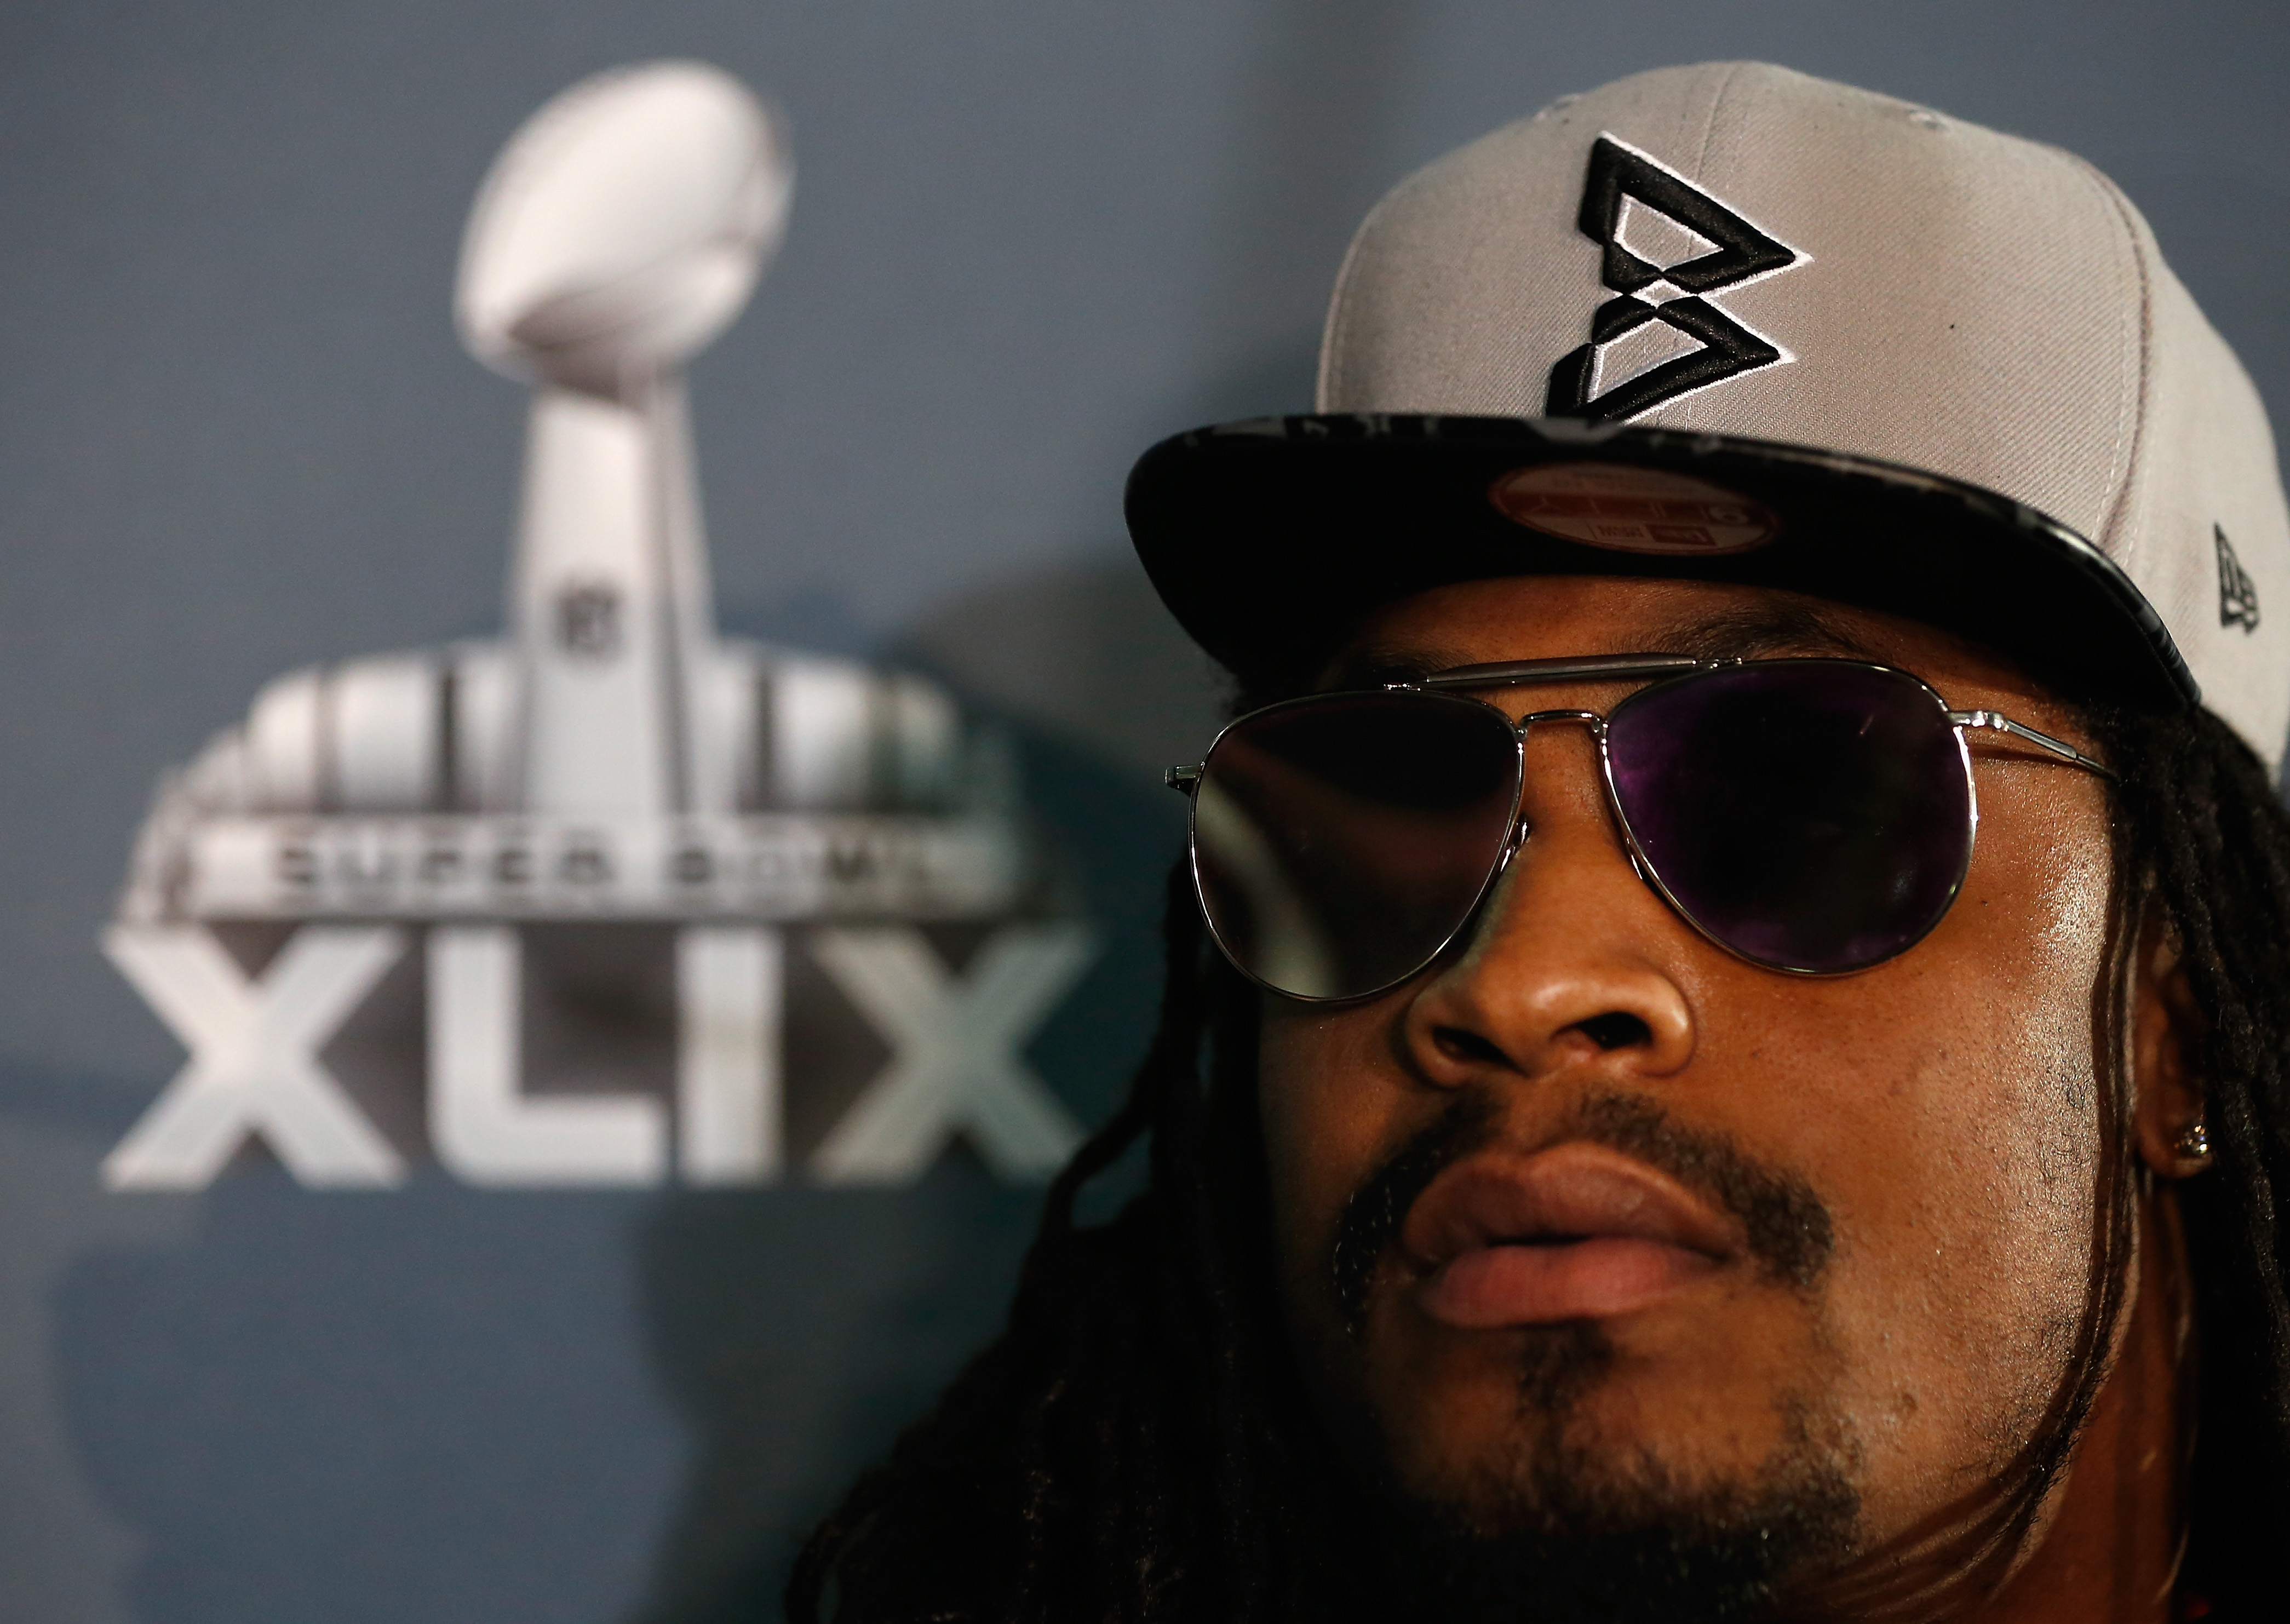 Running back Marshawn Lynch #24 of the Seattle Seahawks sits at his podium during a Super Bowl XLIX media availability on Jan. 28, 2015 in Chandler, Ariz. (Christian Petersen—Getty Images)